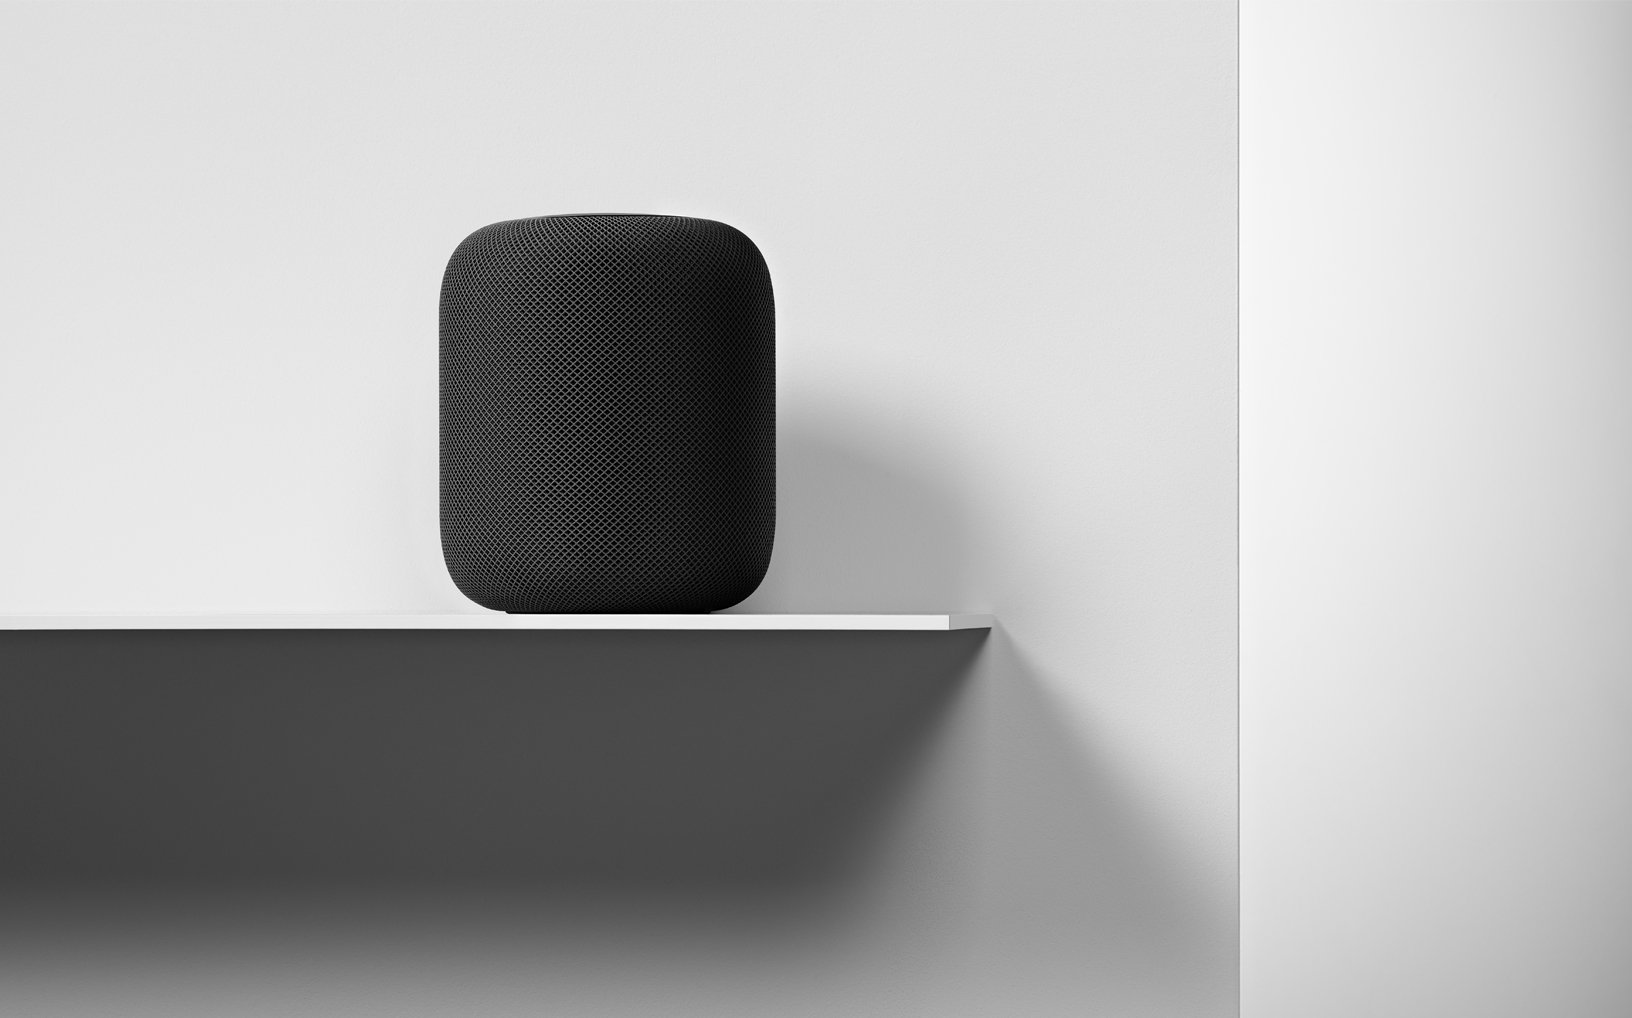 How Homepod Works With Apple Music Itunes Match Icloud Music